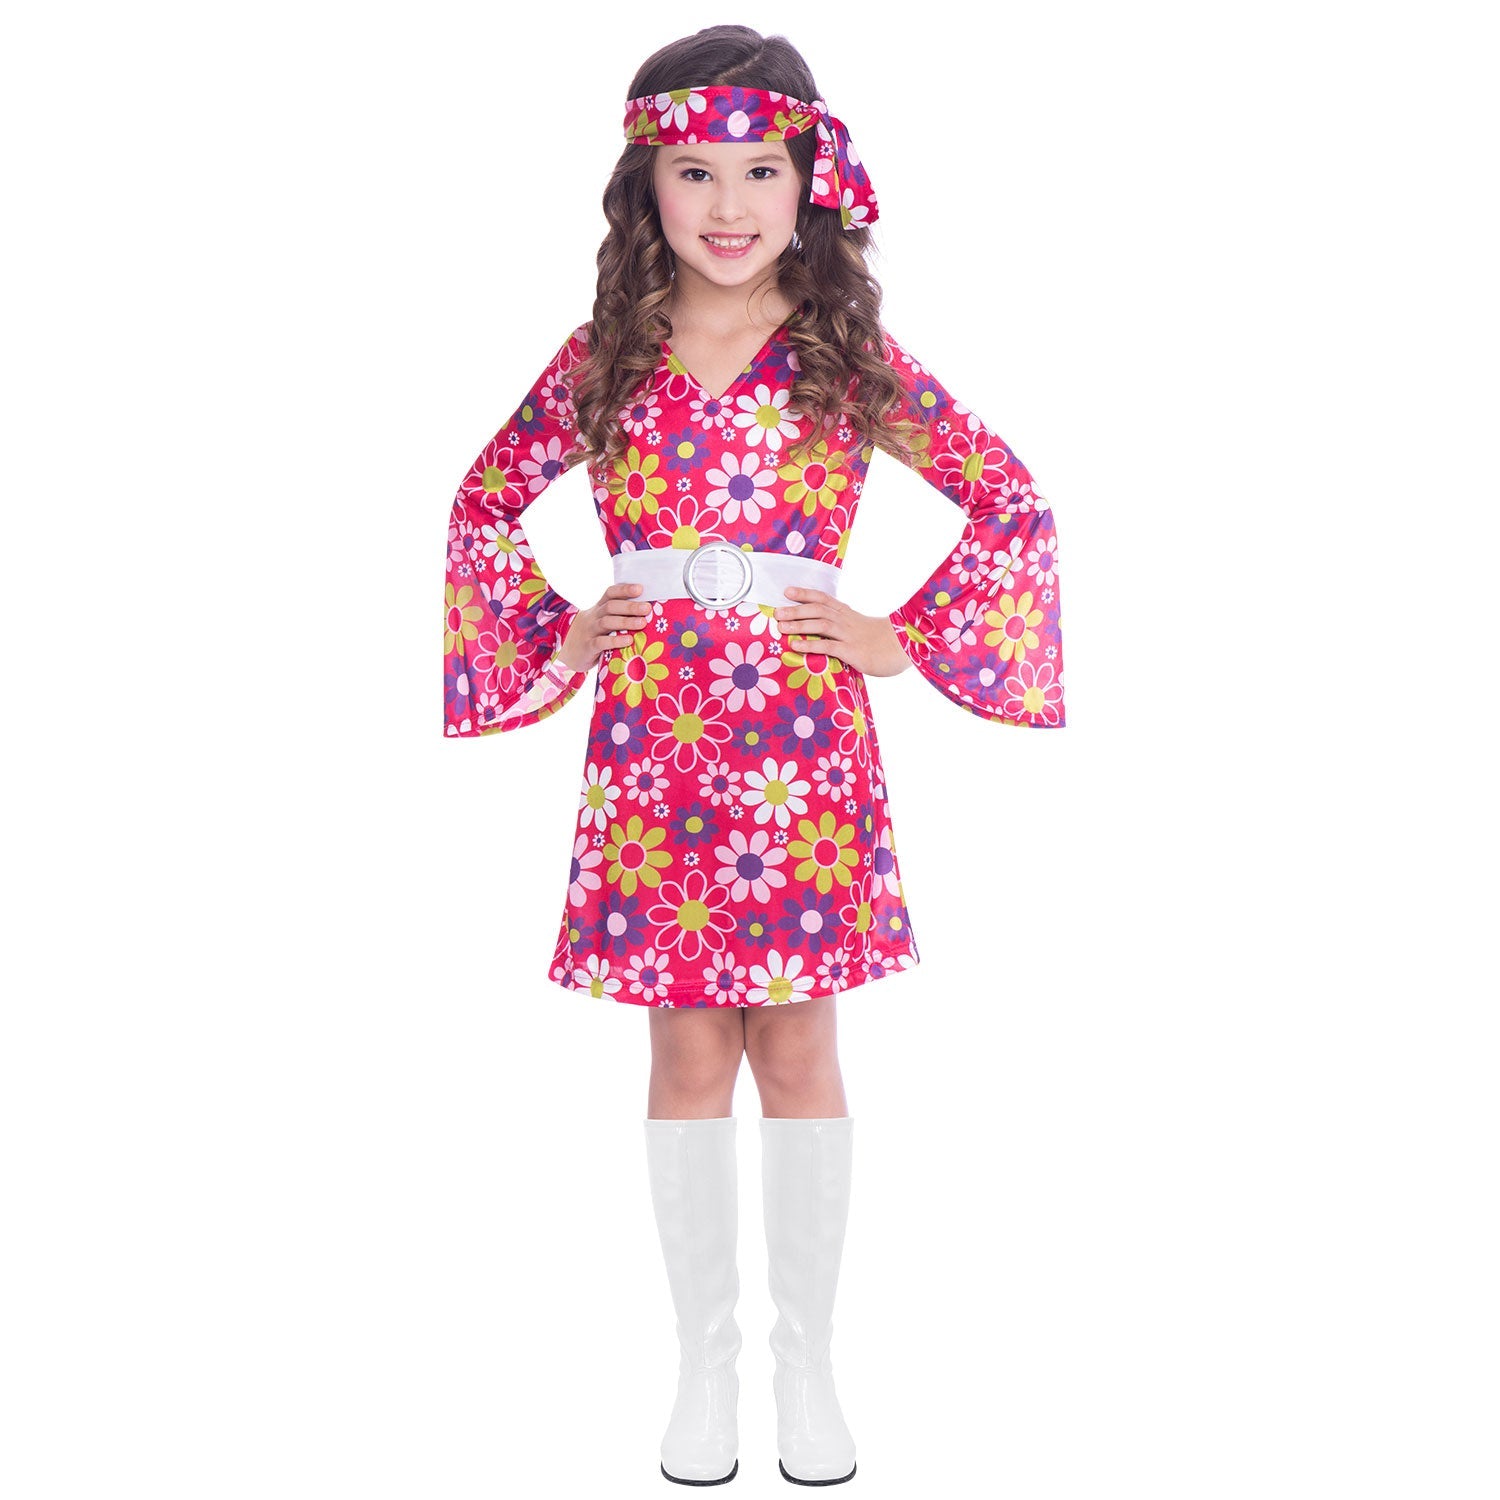 Retro Girl Costume includes dress, headscarf and belt